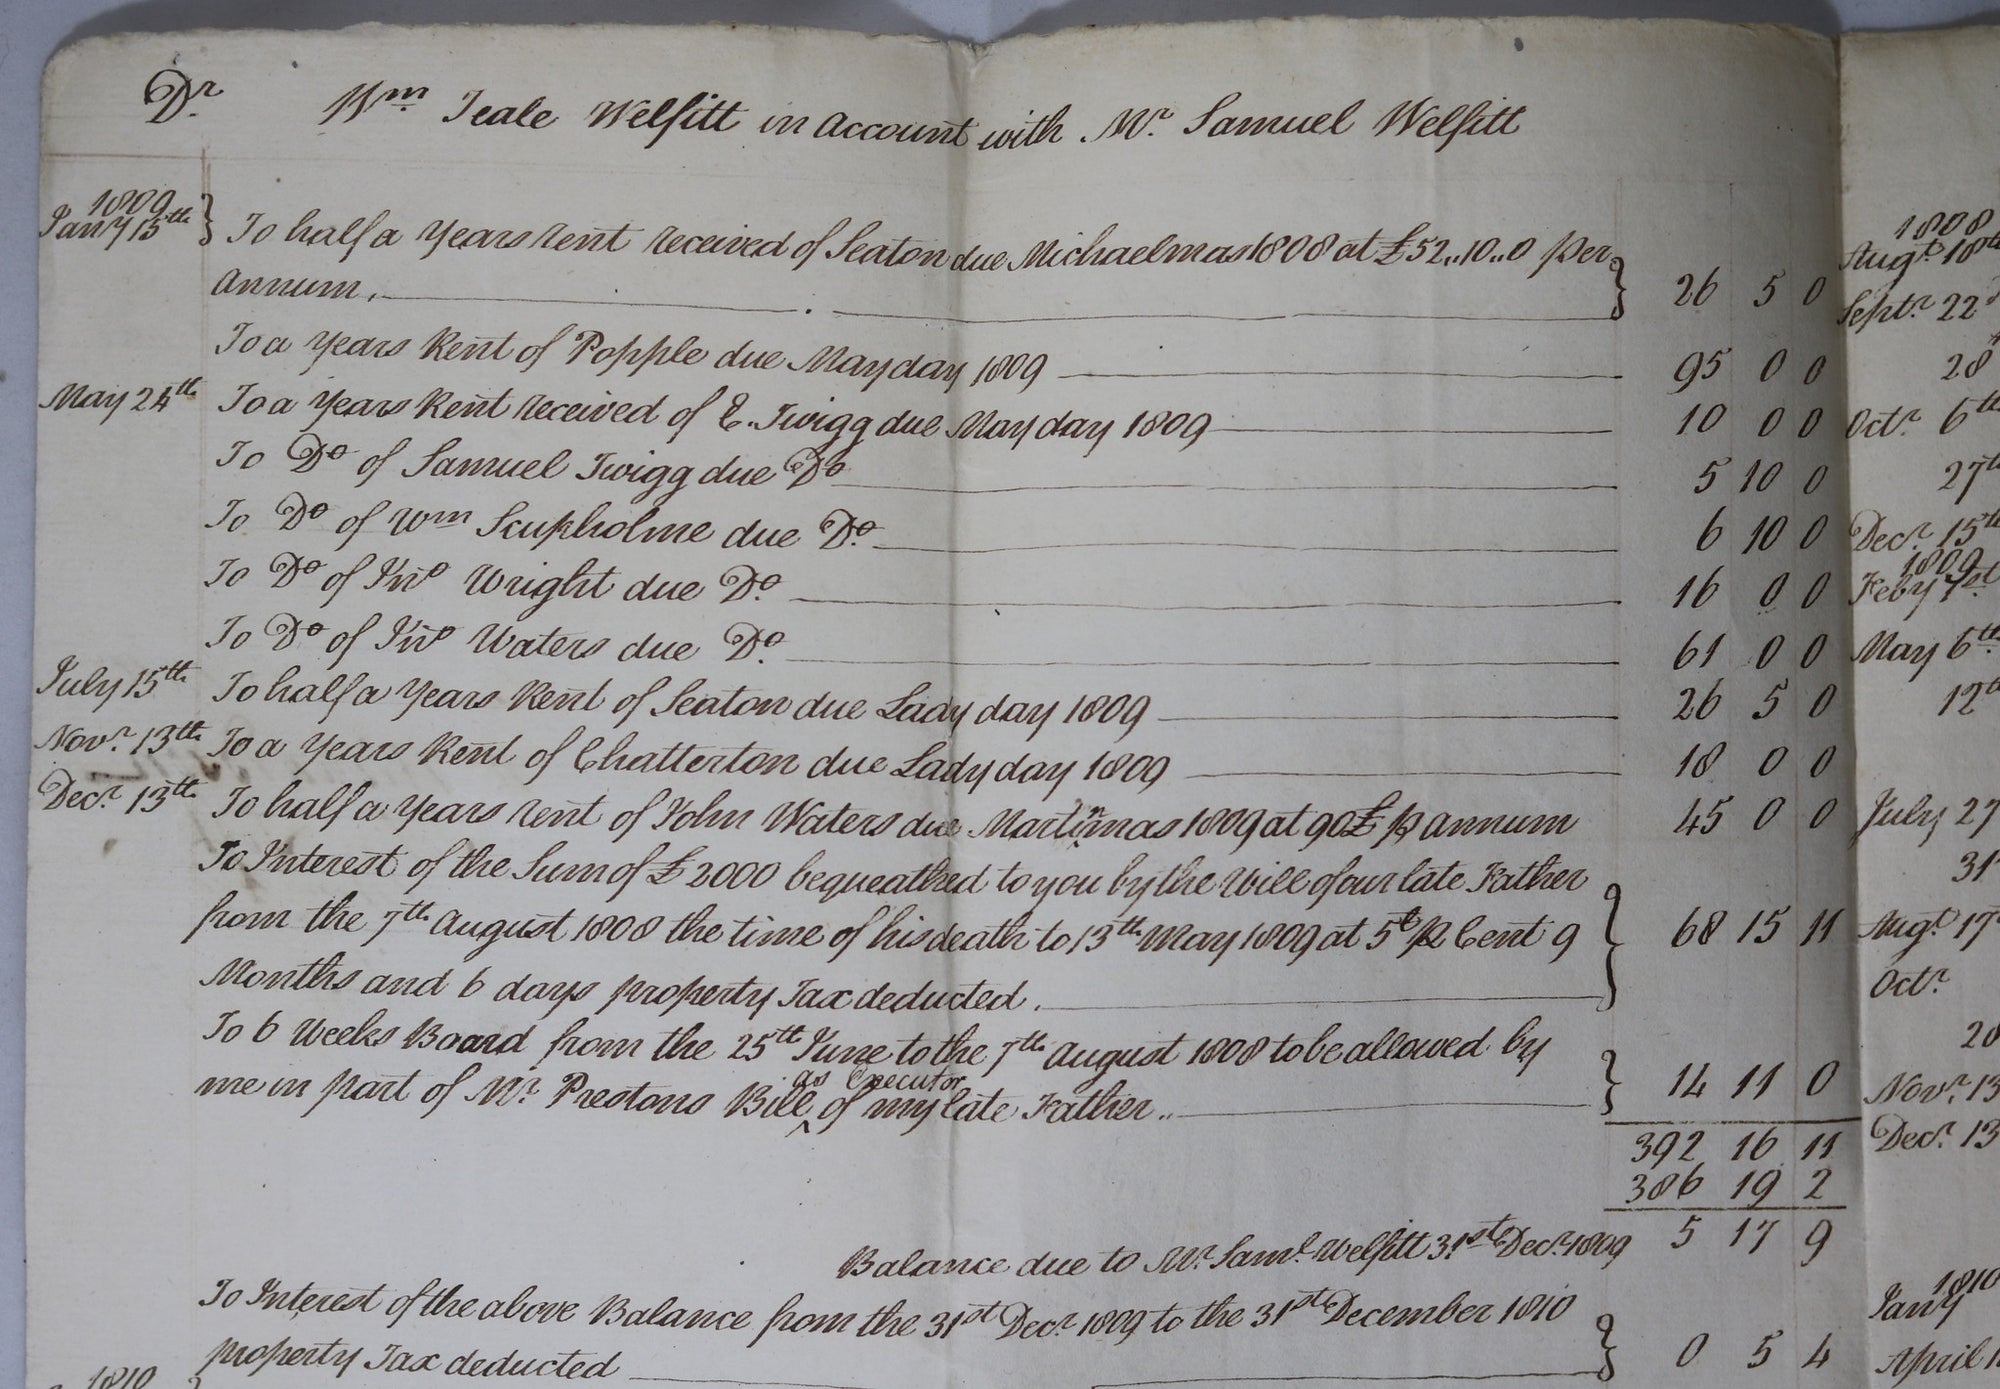 1813 financial accounts by guardian Welfitt Manby Hall, Lincolnshire